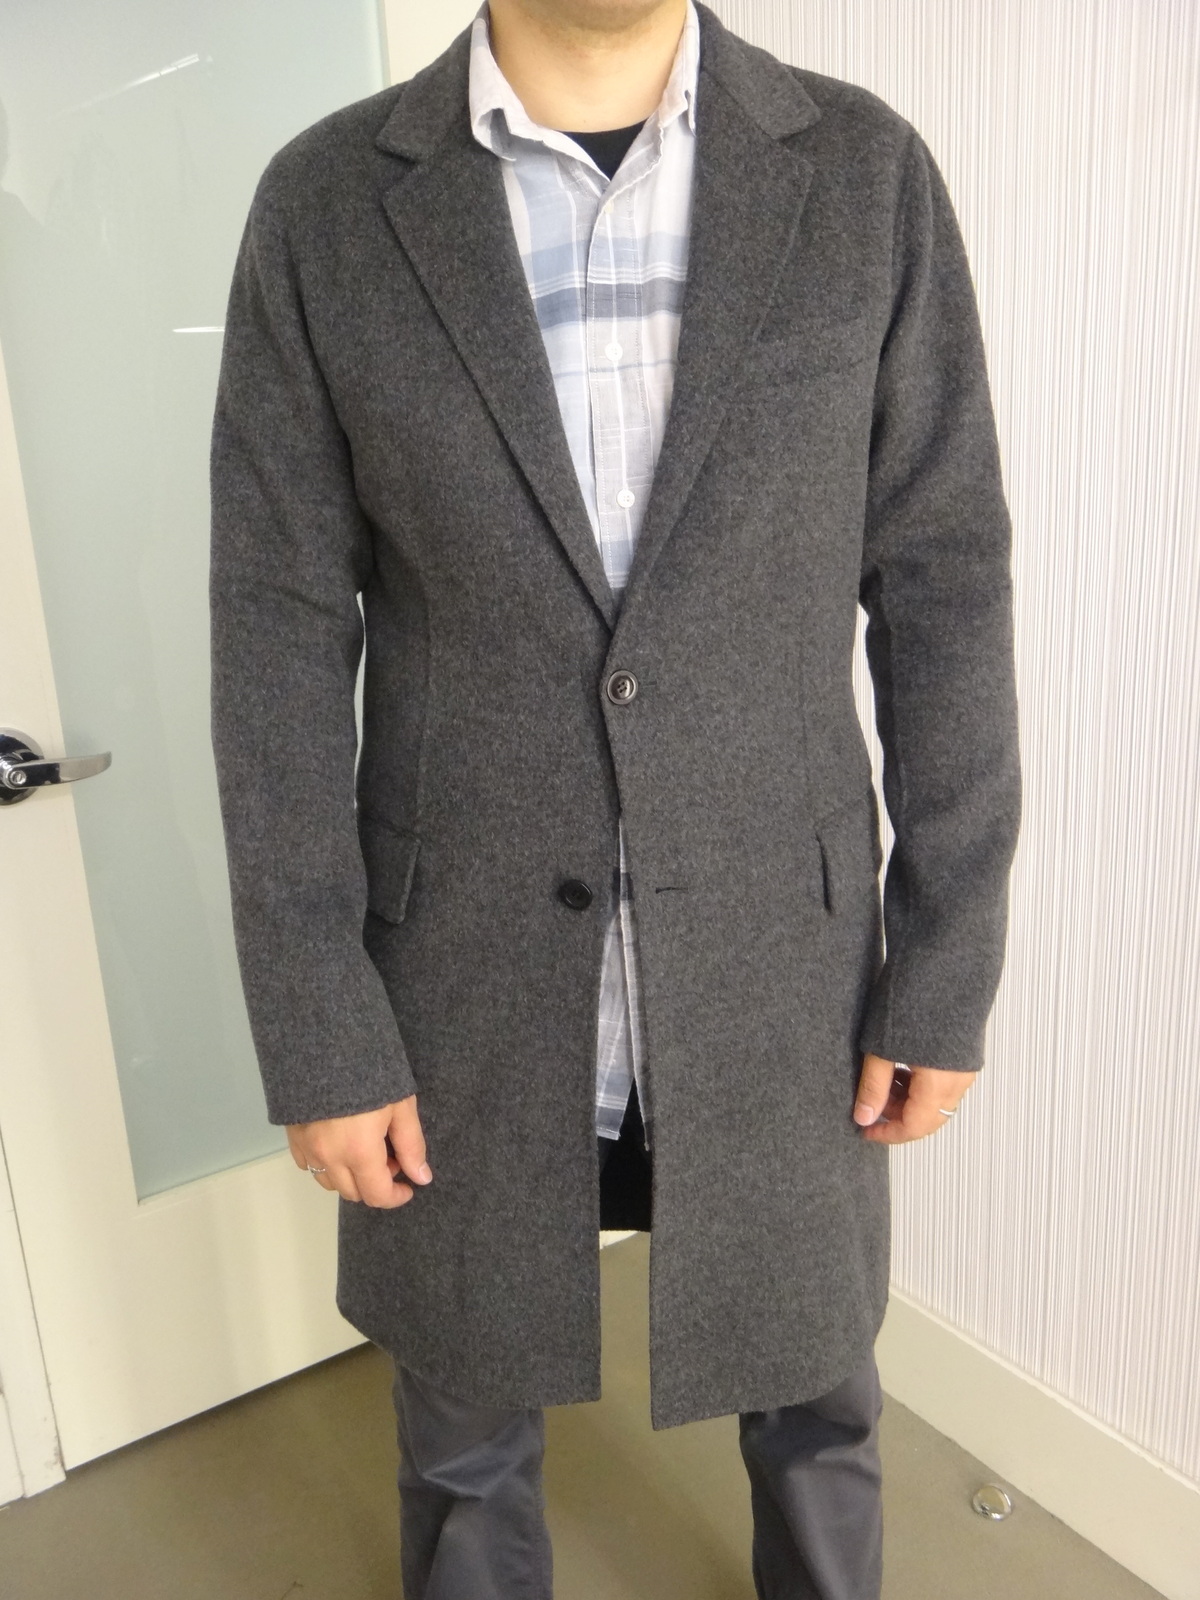 The Shy Stylist - a men's style blog: Favorite Finds: Lightweight Topcoat